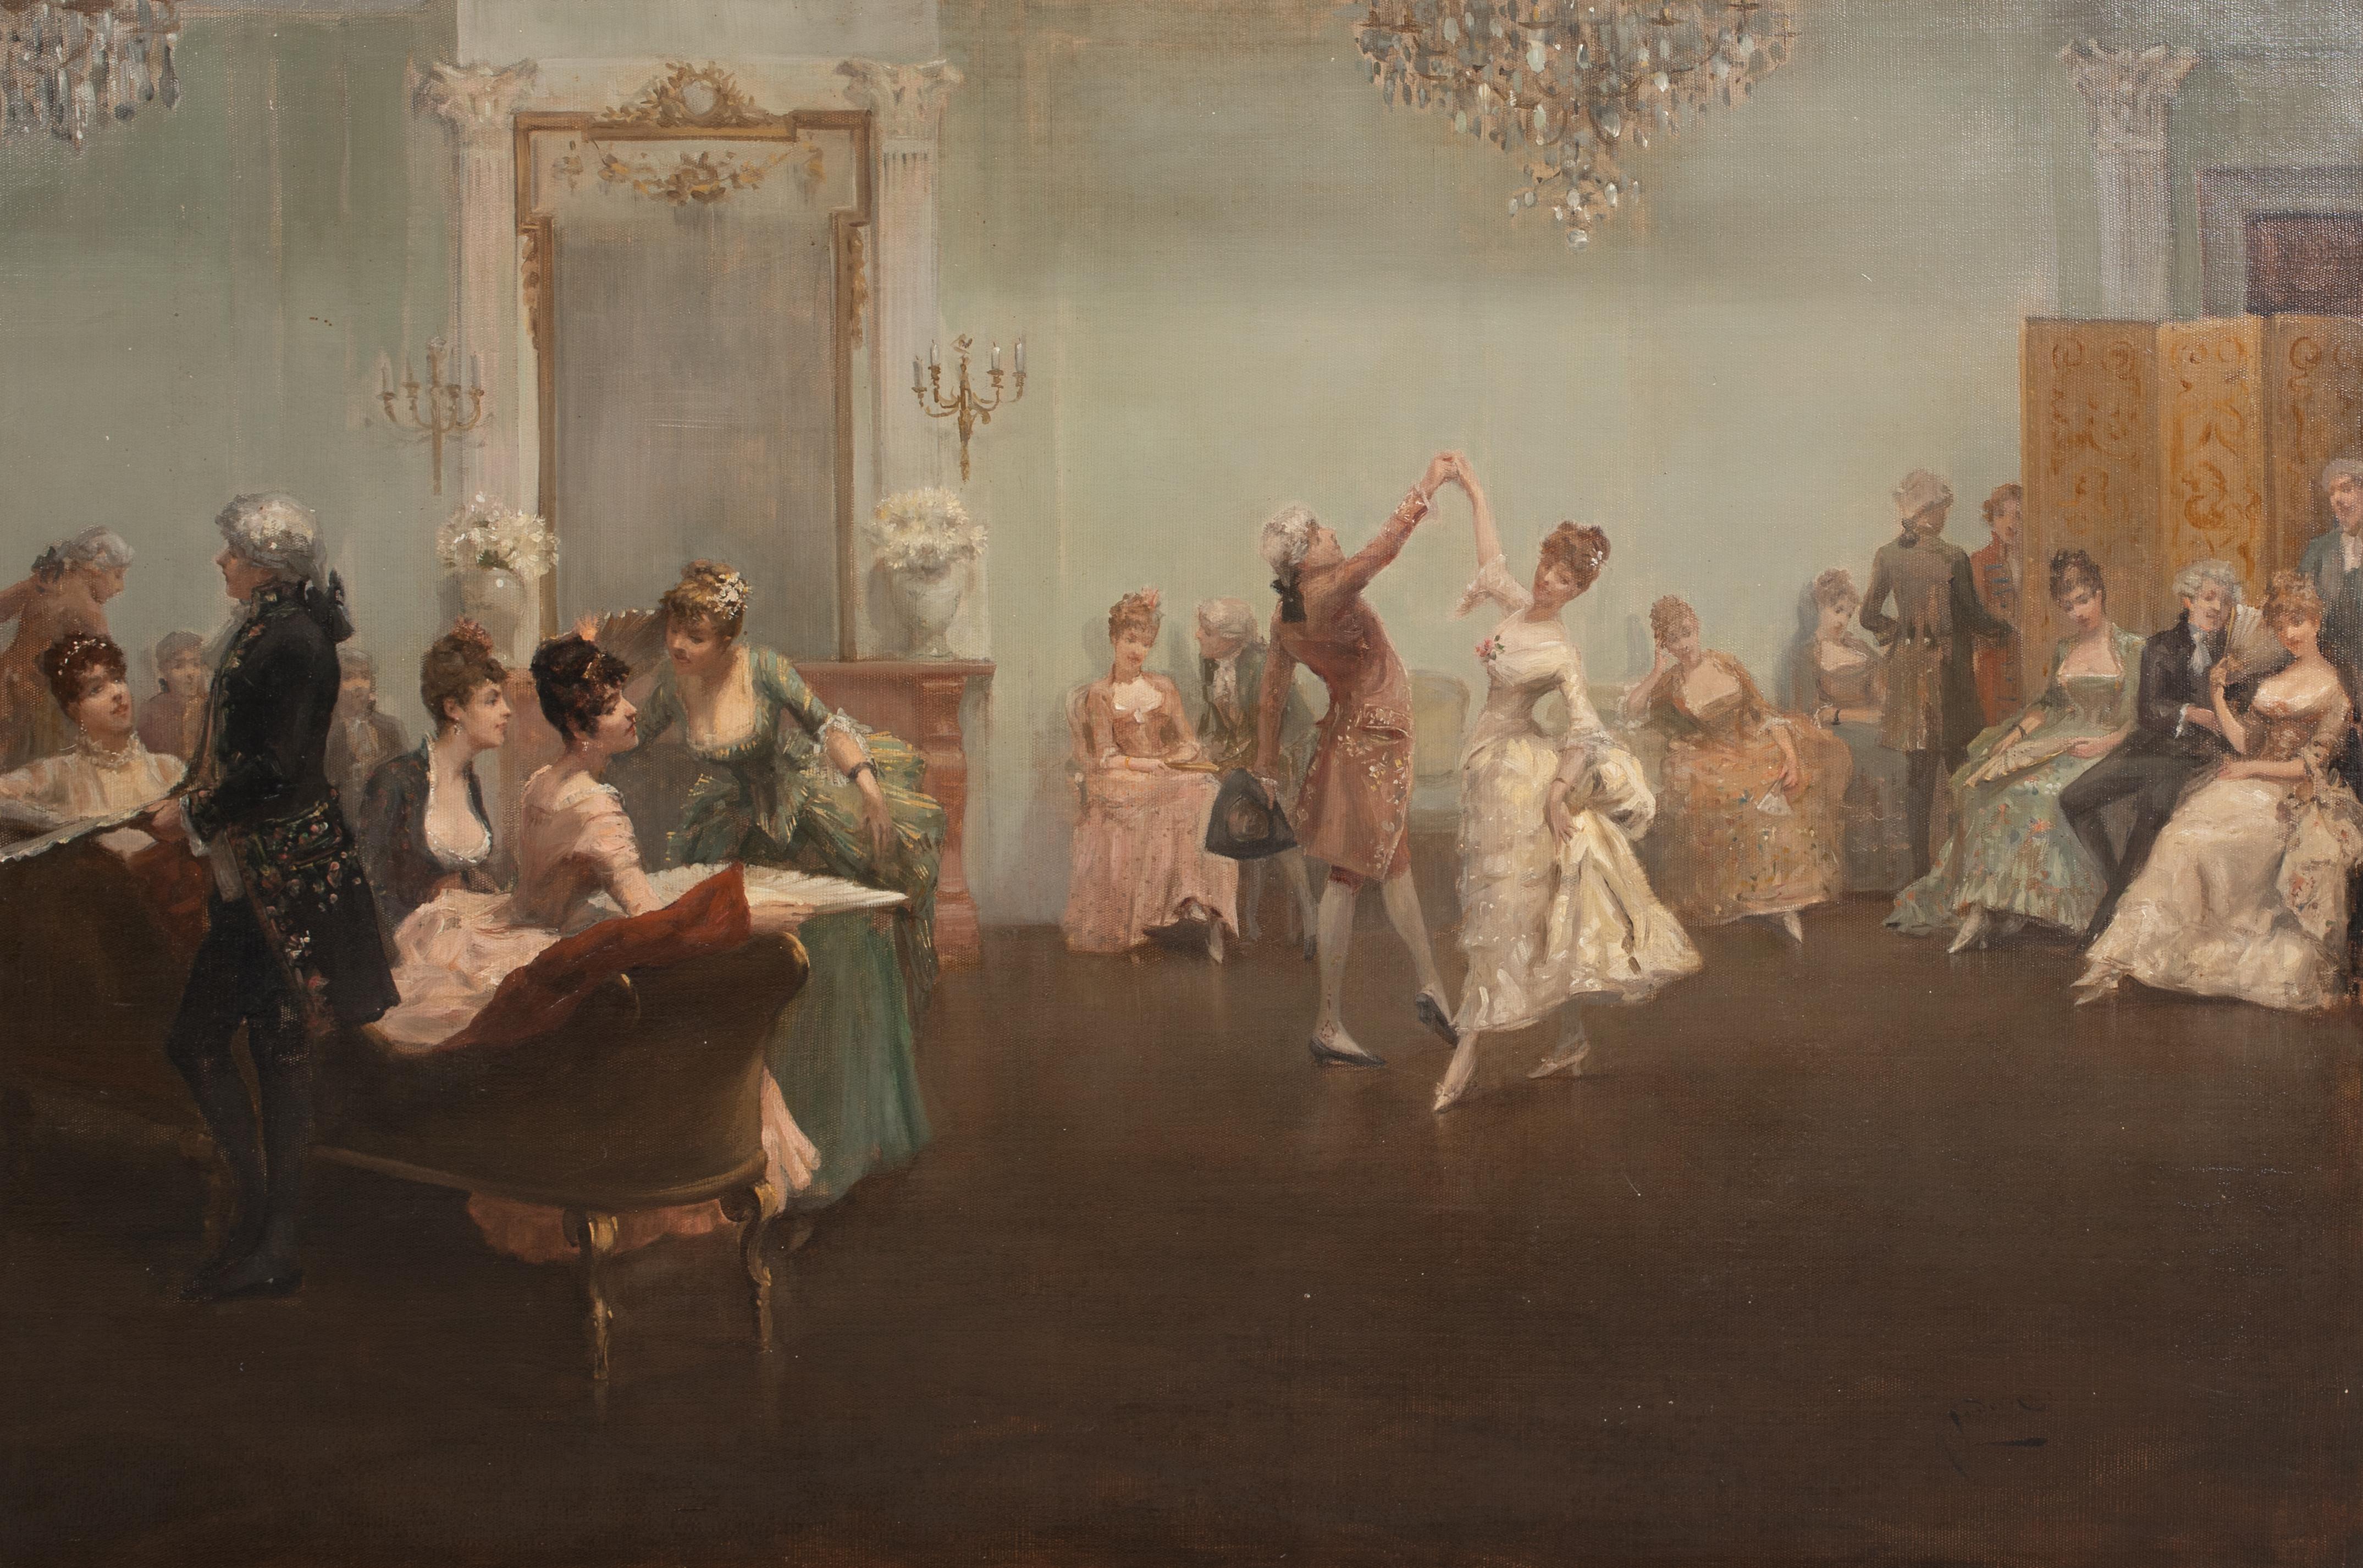 The French Ball, 19th Century

by ALBERT LUDOVICI (1820-1894) to $70,000

Large 19th Century French interior scene of a ball, oil on canvas by Albert Ludovici. Excellent quality and condition large panoramic interior scene of an aristocratic soiree